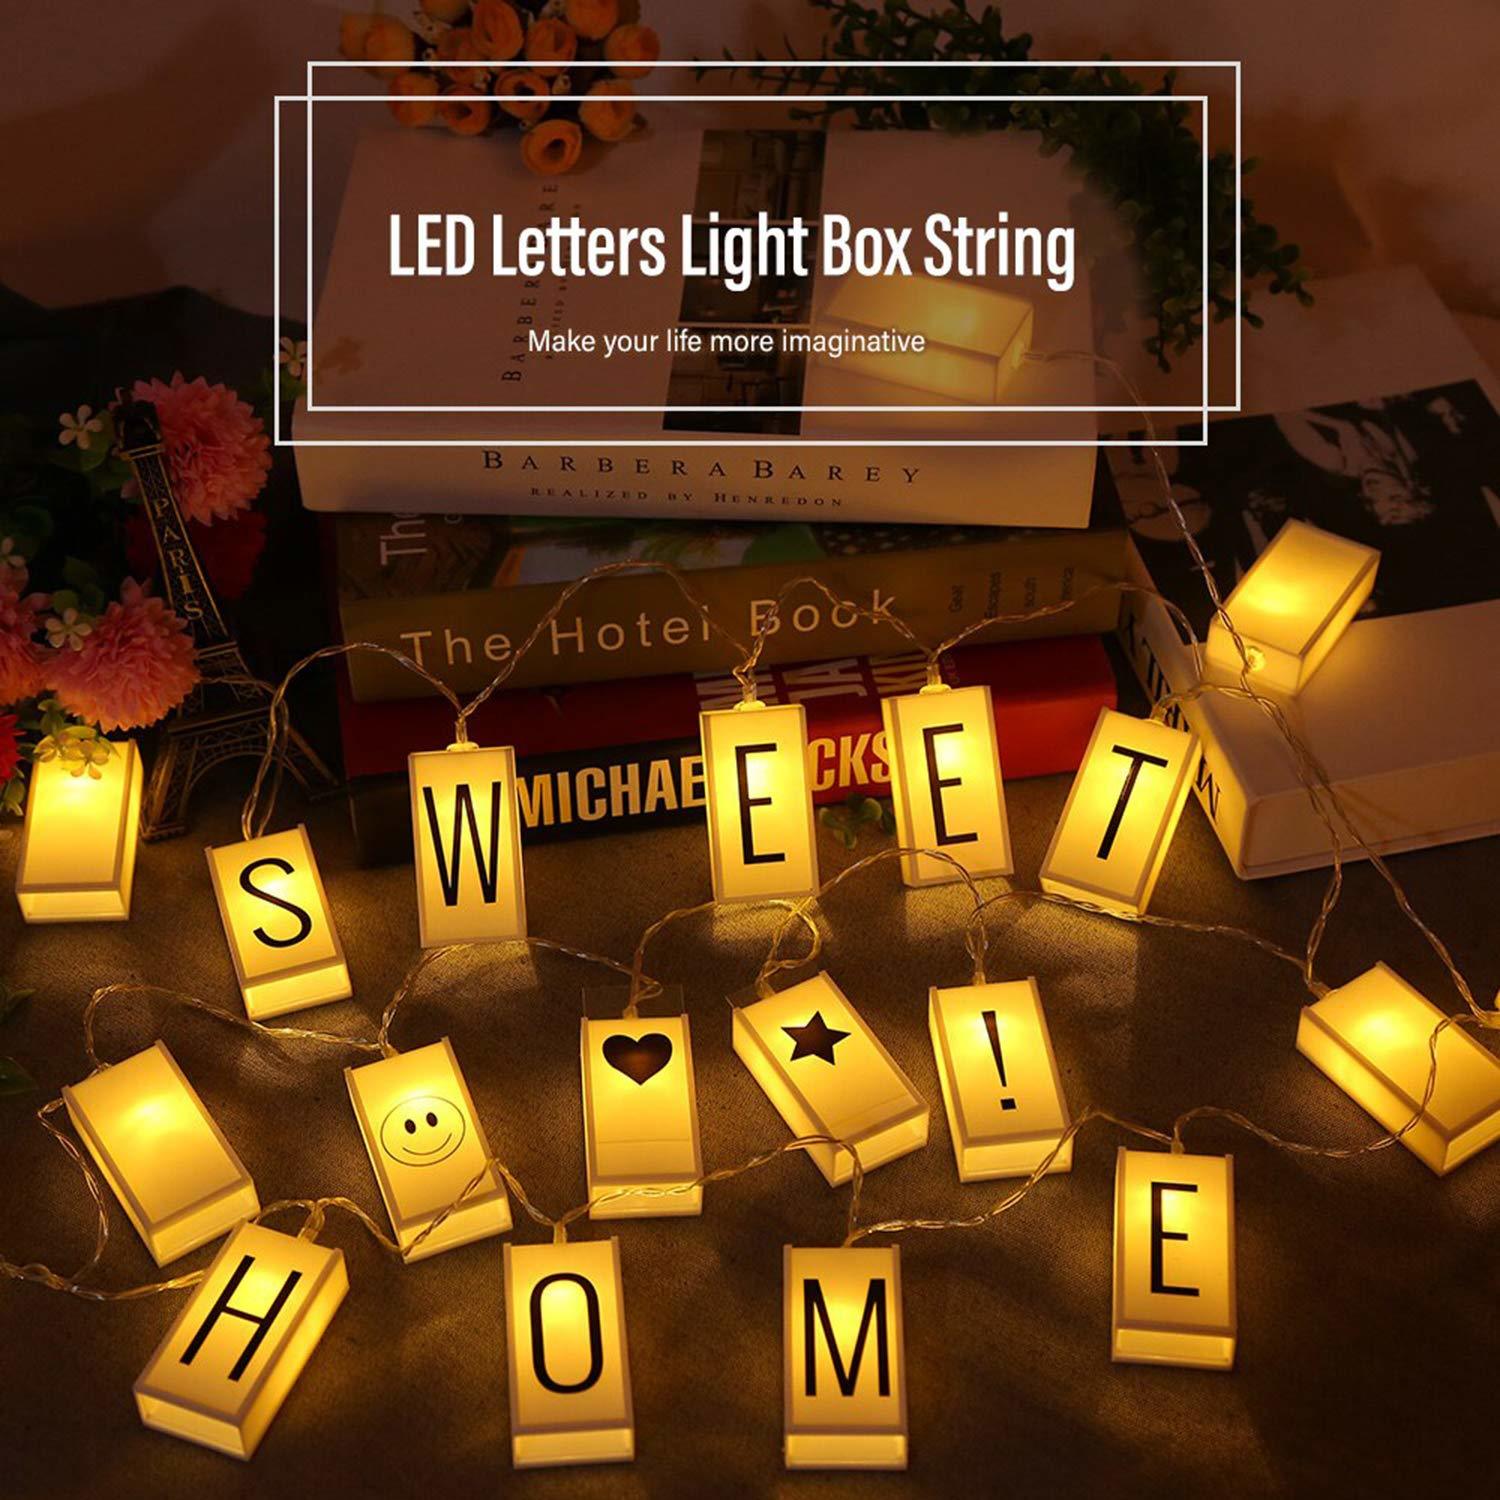 20 Led Letter Light Box String with 96 Letters Numbers Symbols Free Combination DIY Letter